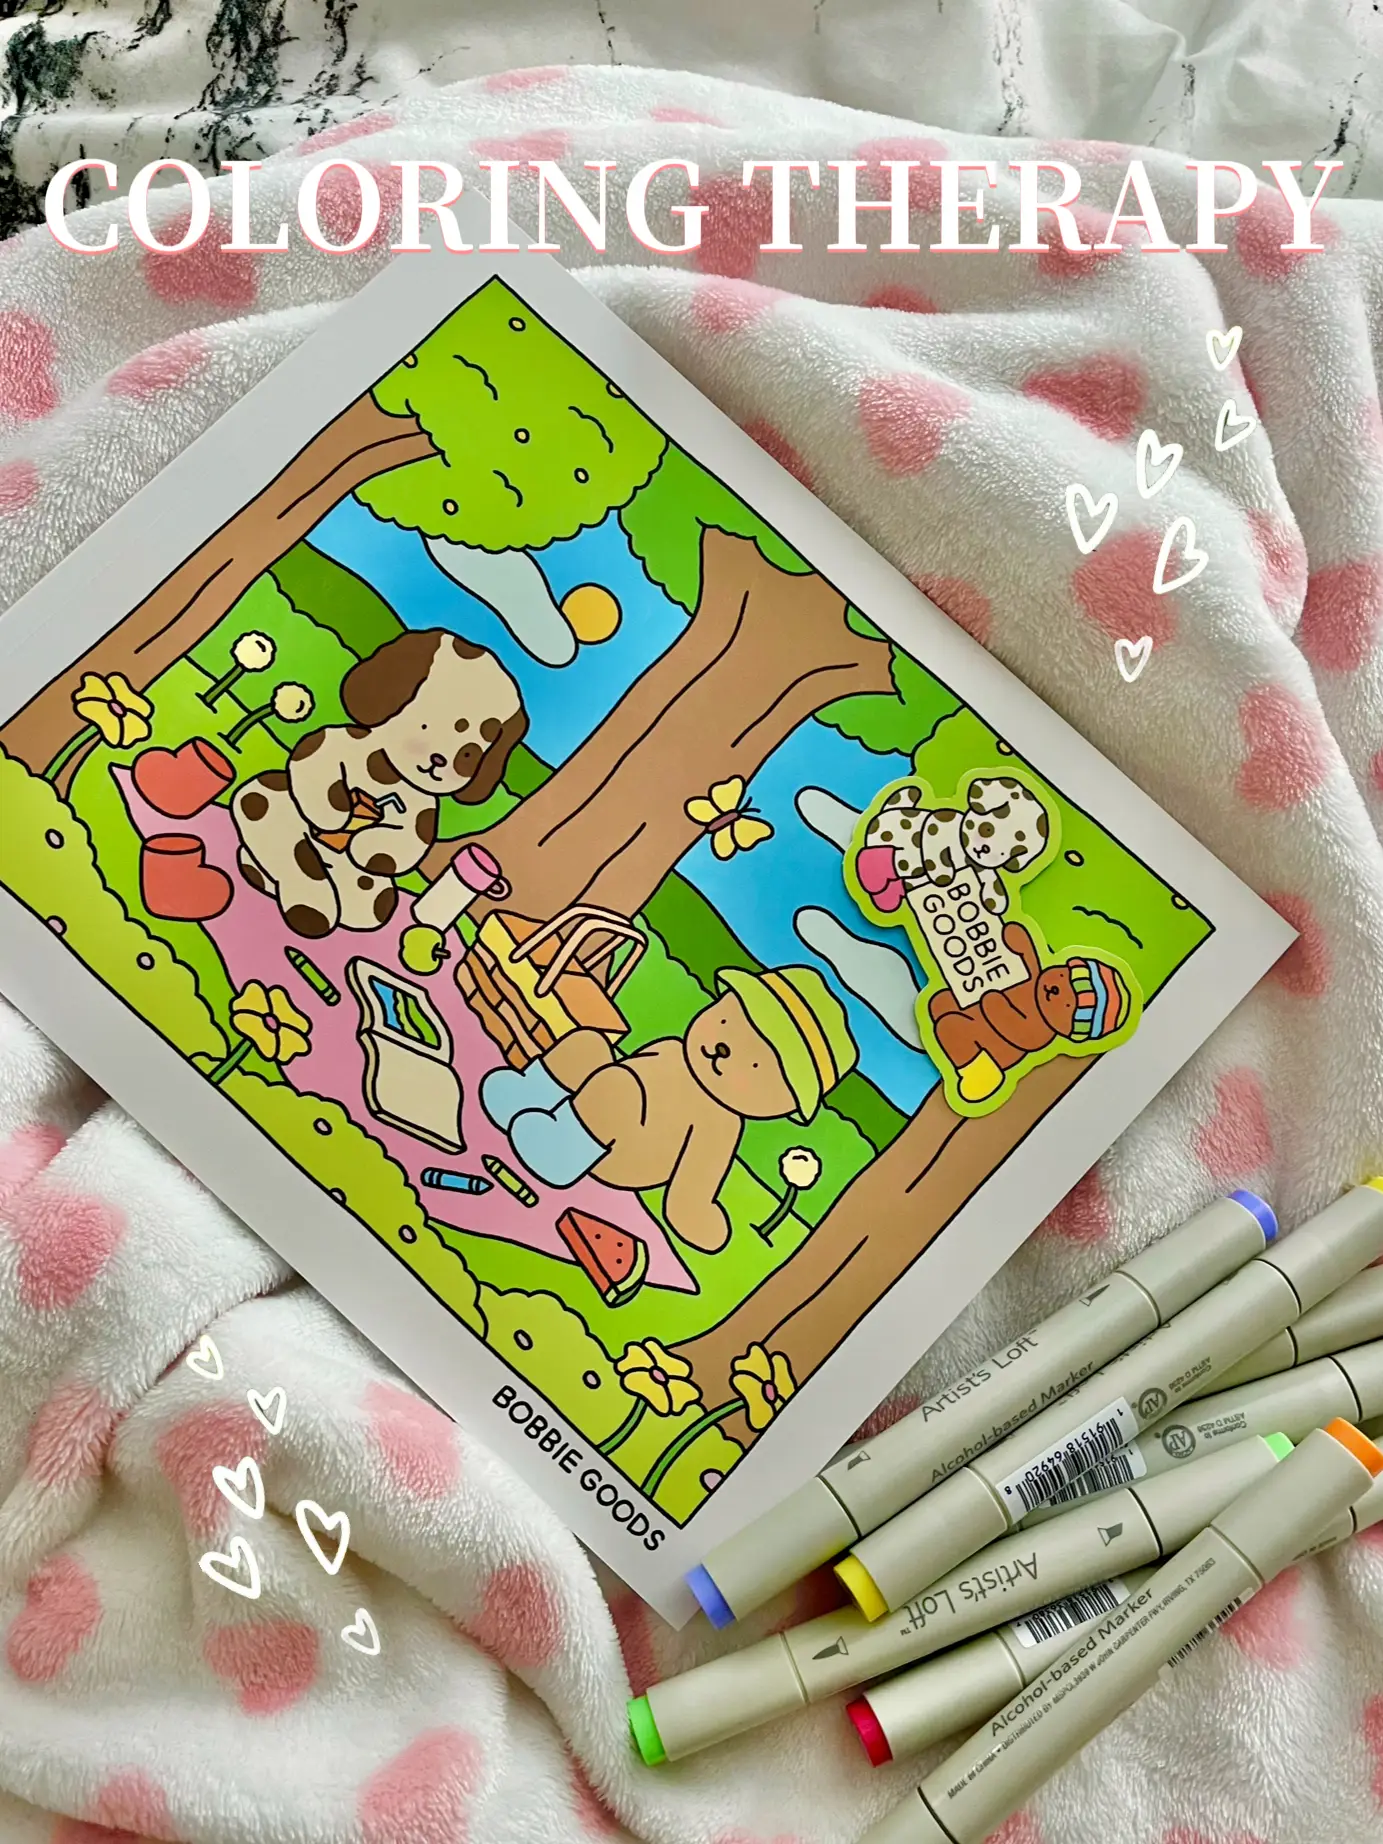 Bobbie Goods Coloring Book: Amazing Coloring Book With 30 Cute